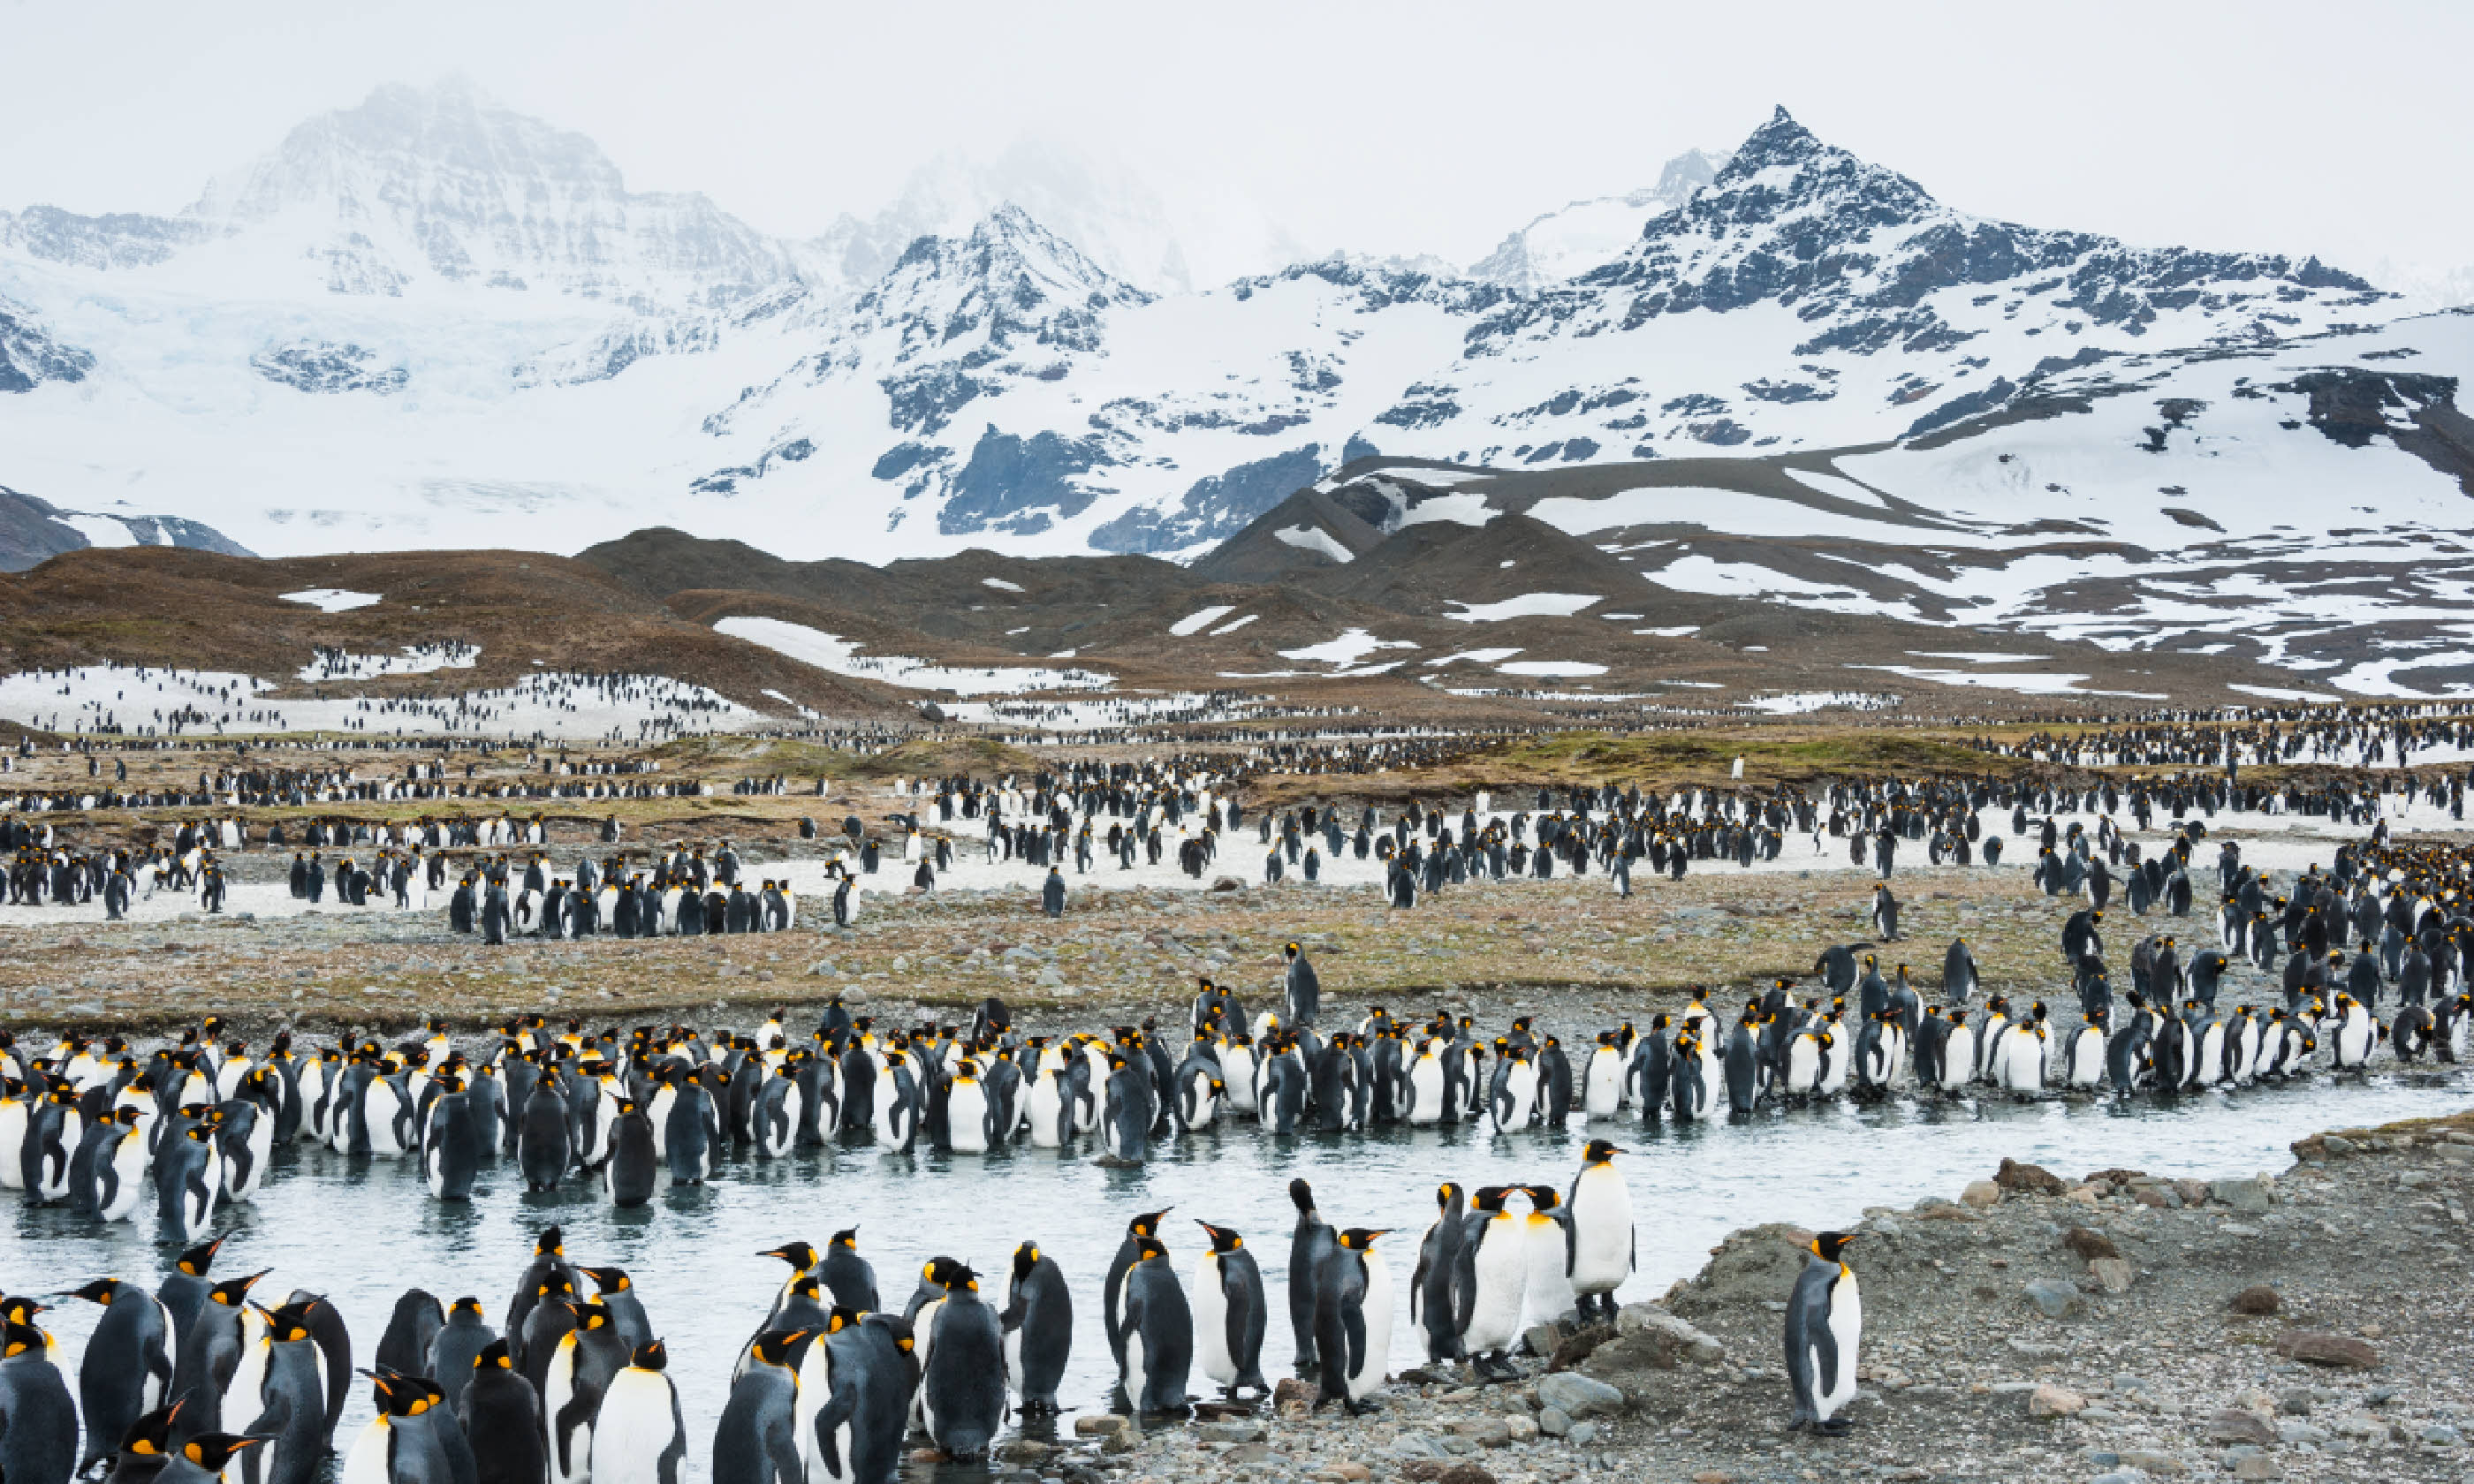 Colony of king penguins in South Georgia, Antarctica (Shutterstock)